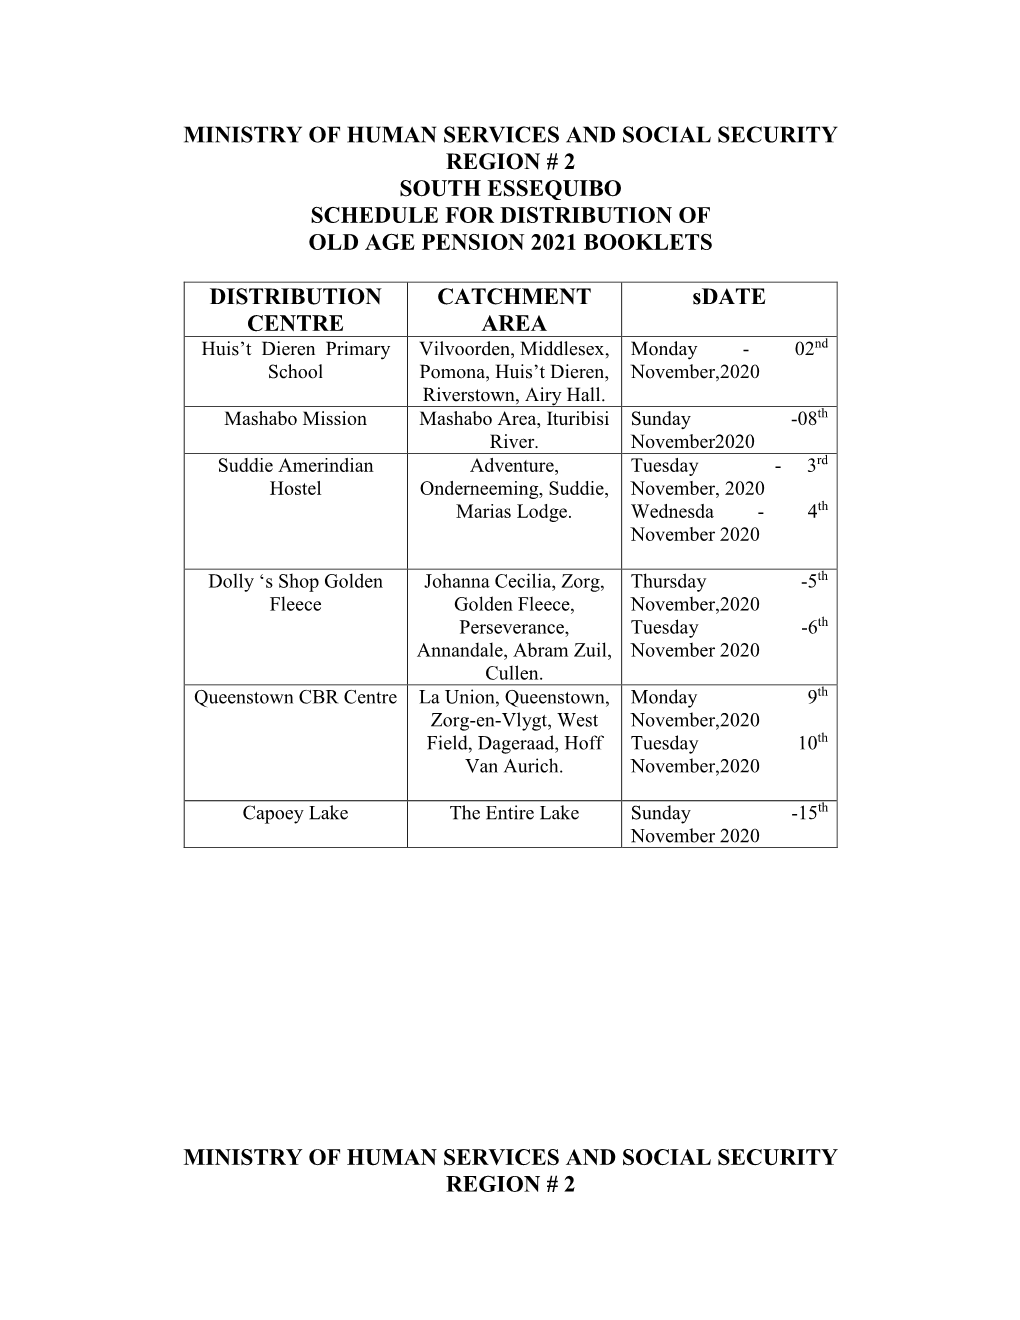 Ministry of Human Services and Social Security Region # 2 South Essequibo Schedule for Distribution of Old Age Pension 2021 Booklets